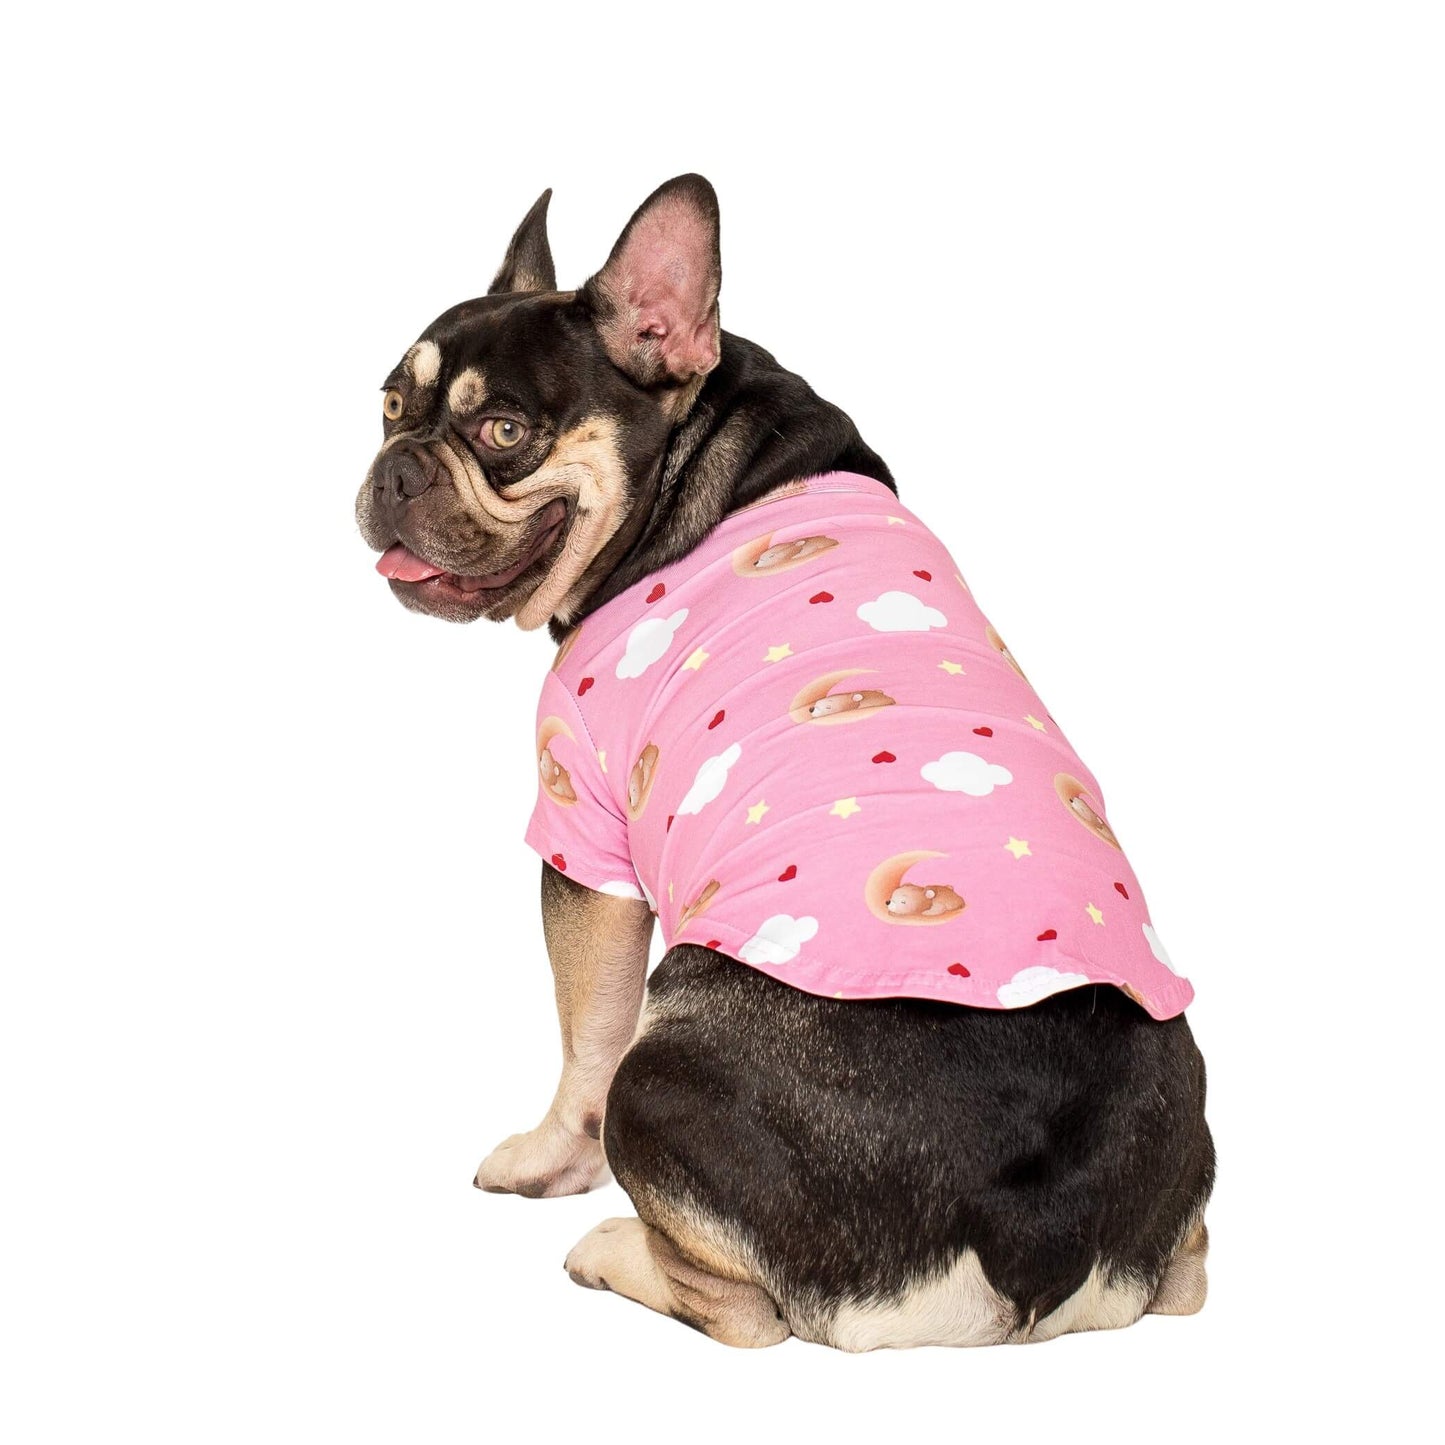 A close up photo of a French Bulldogs back wearing Lil Dreamer dog pyjamas.